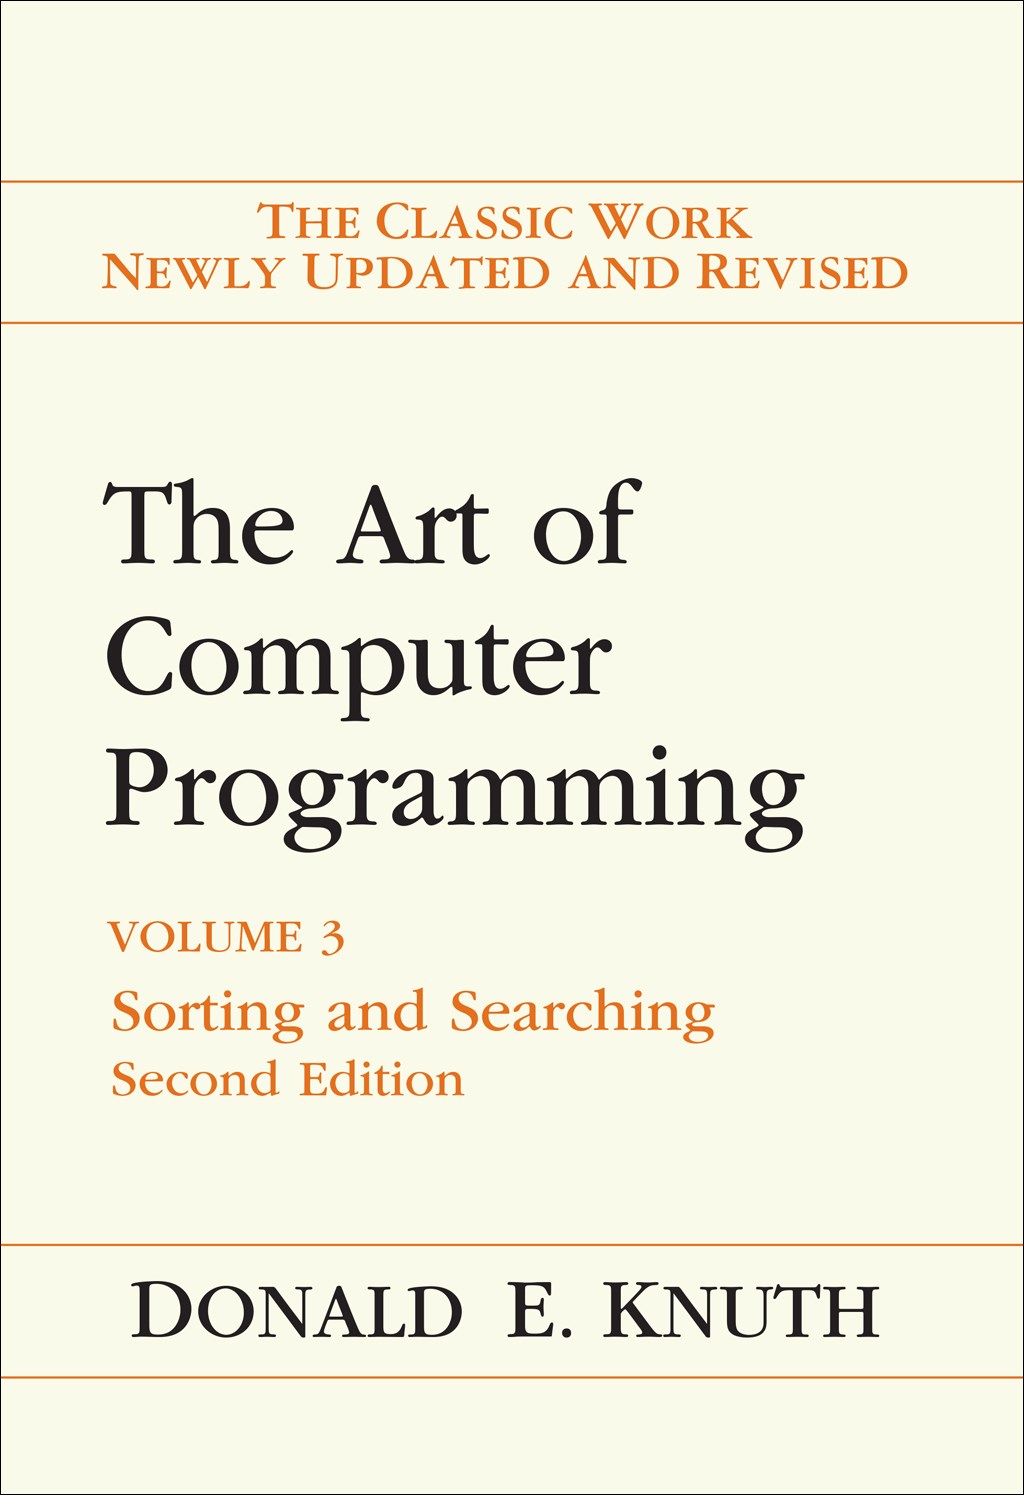 Art of Computer Programming, The: Volume 3, The: Sorting and Searching, 2nd Edition